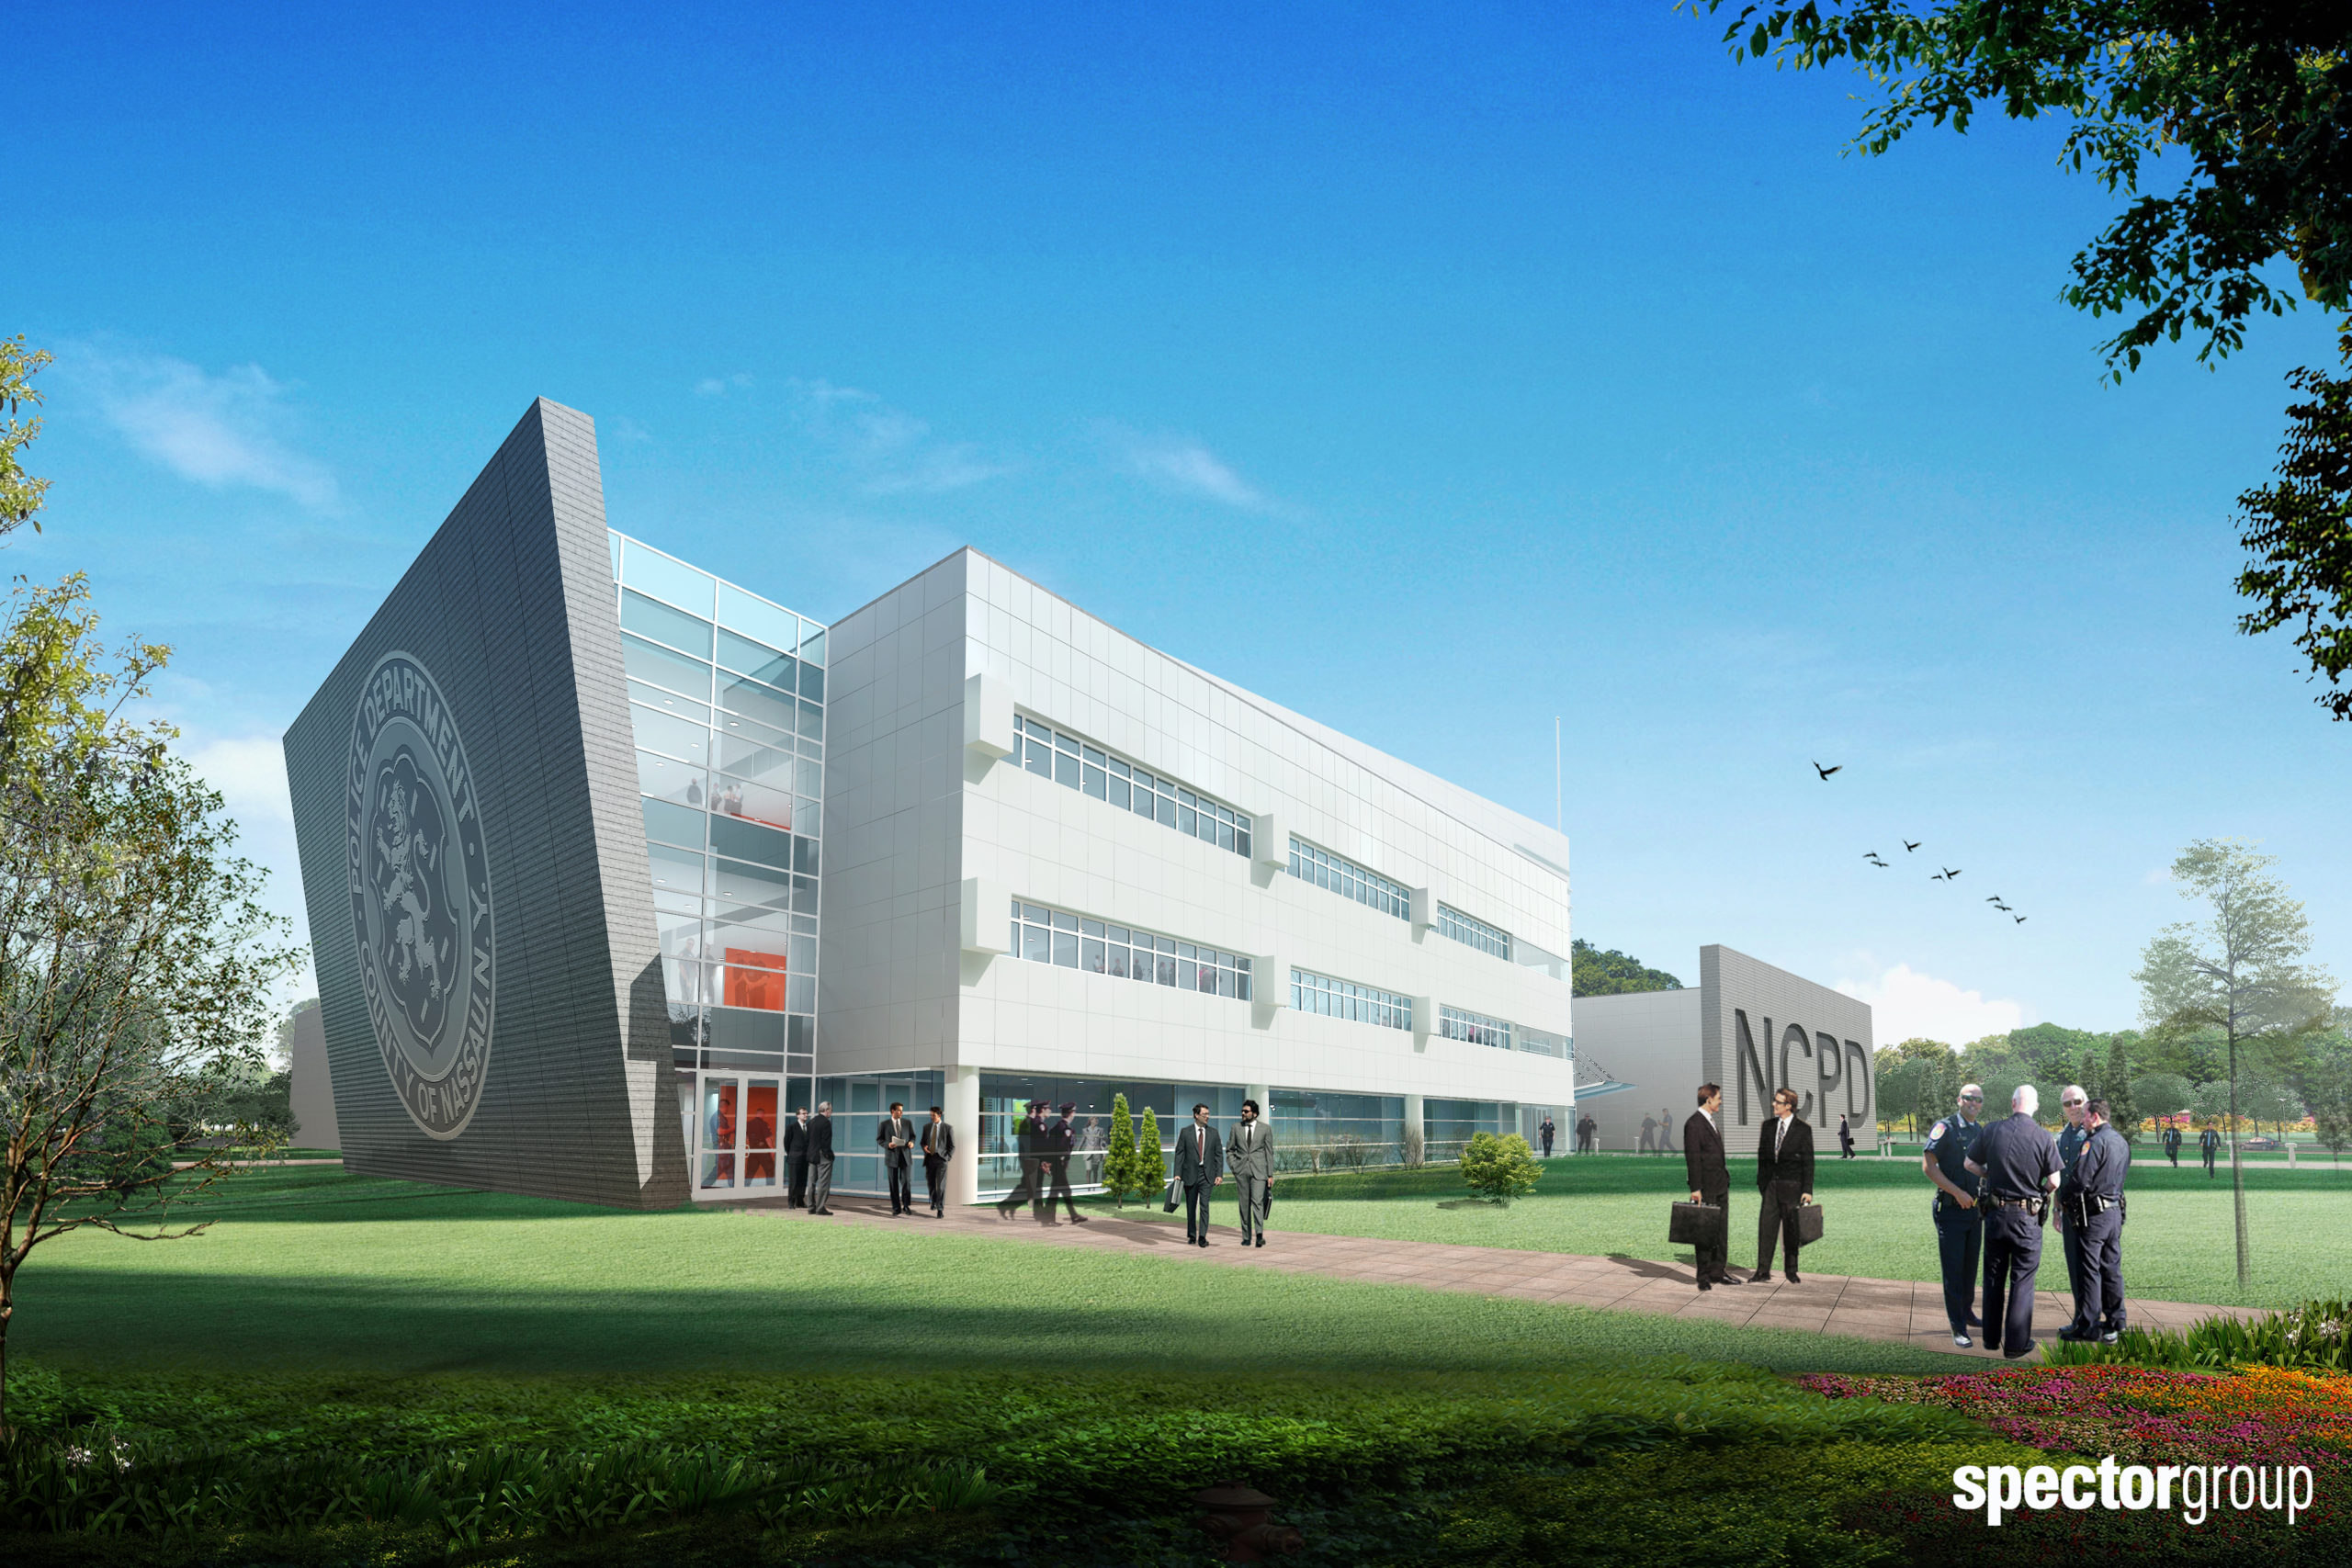 Nassau Community College could become home to a $54 million police academy for the Nassau County Police Department. (Photo rendering by Spector Group)